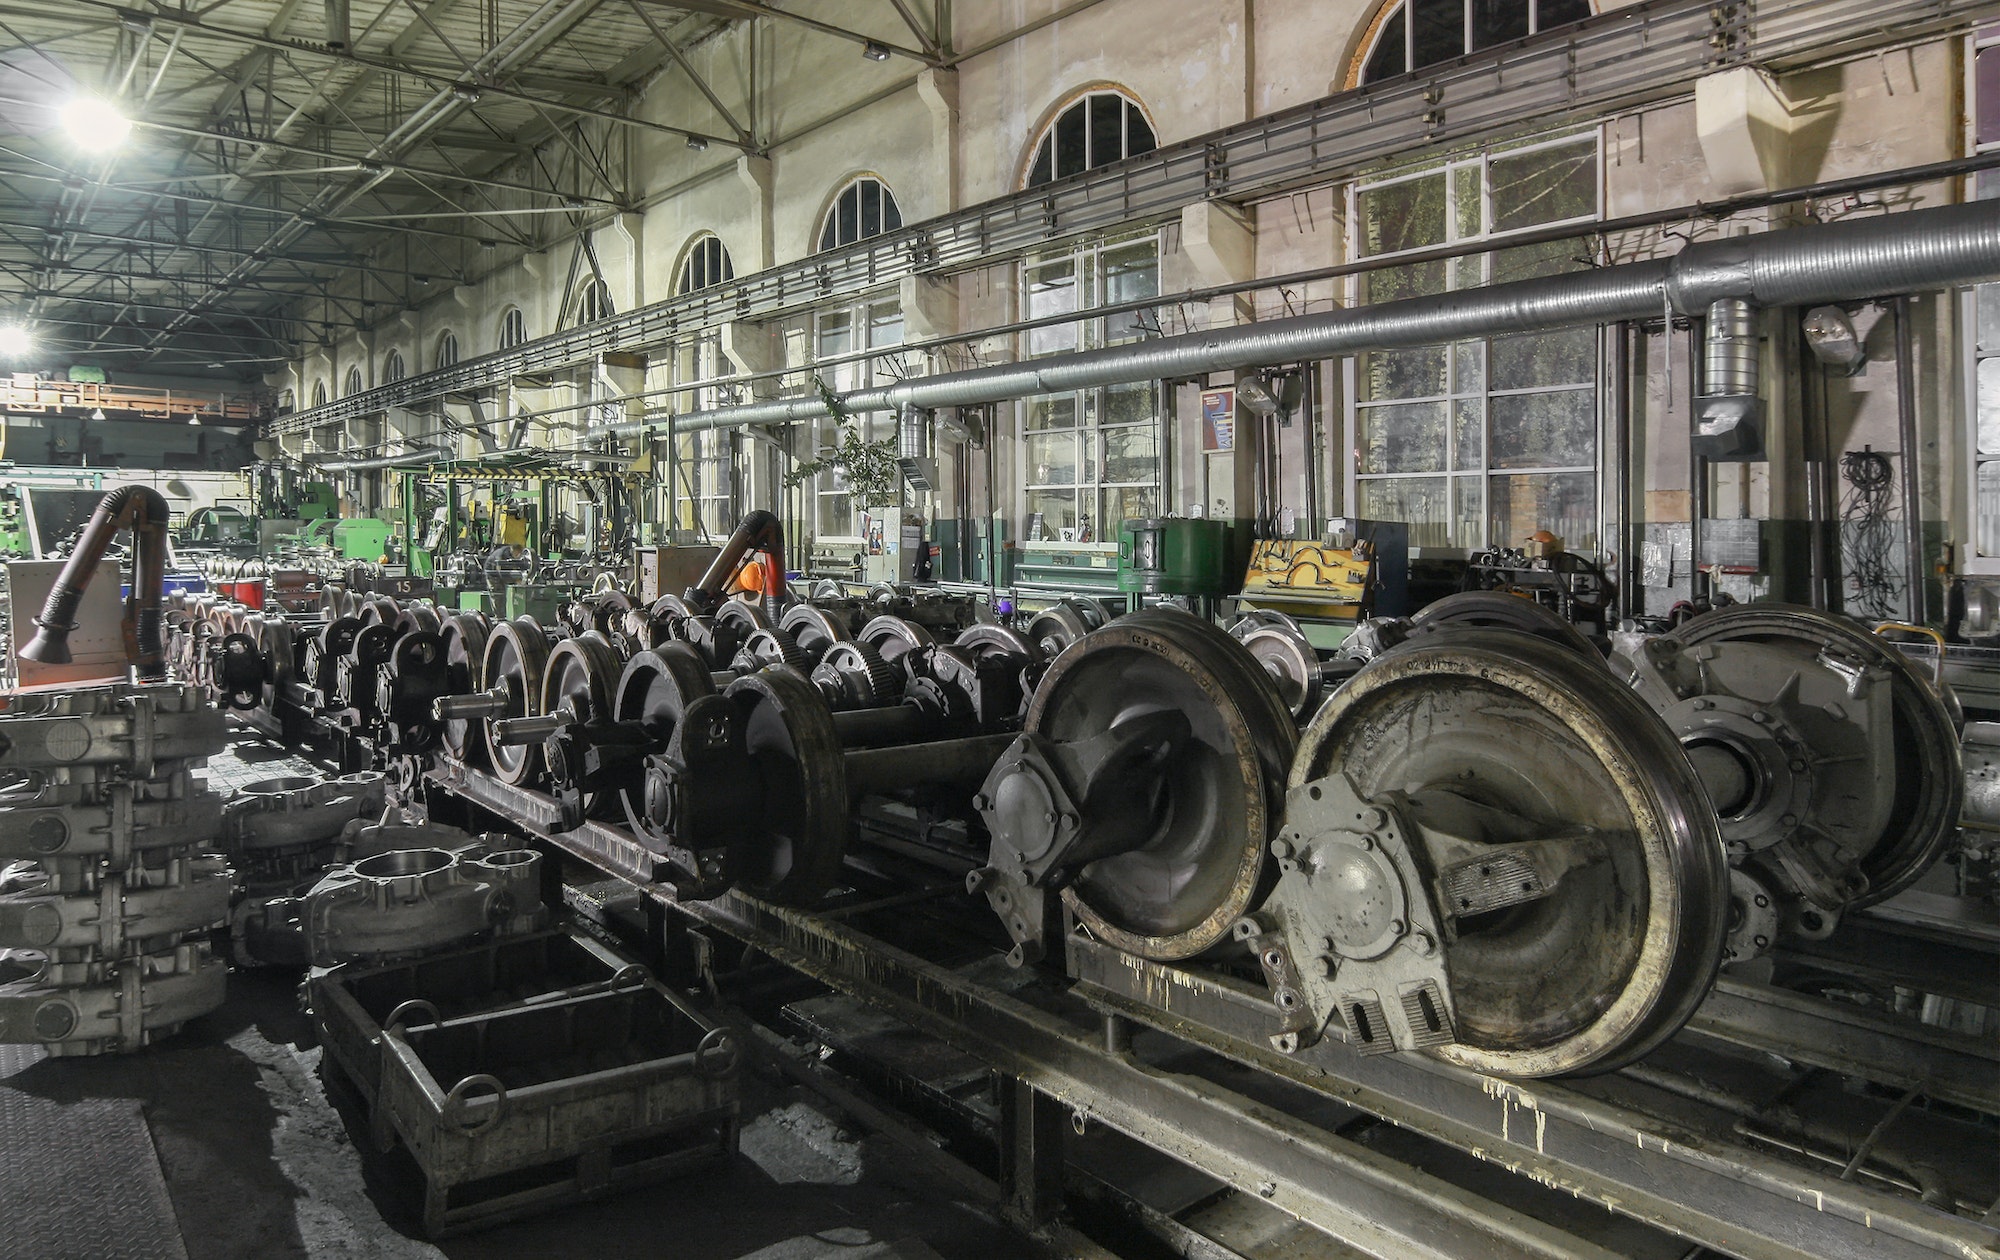 Many railway wheels in the factory